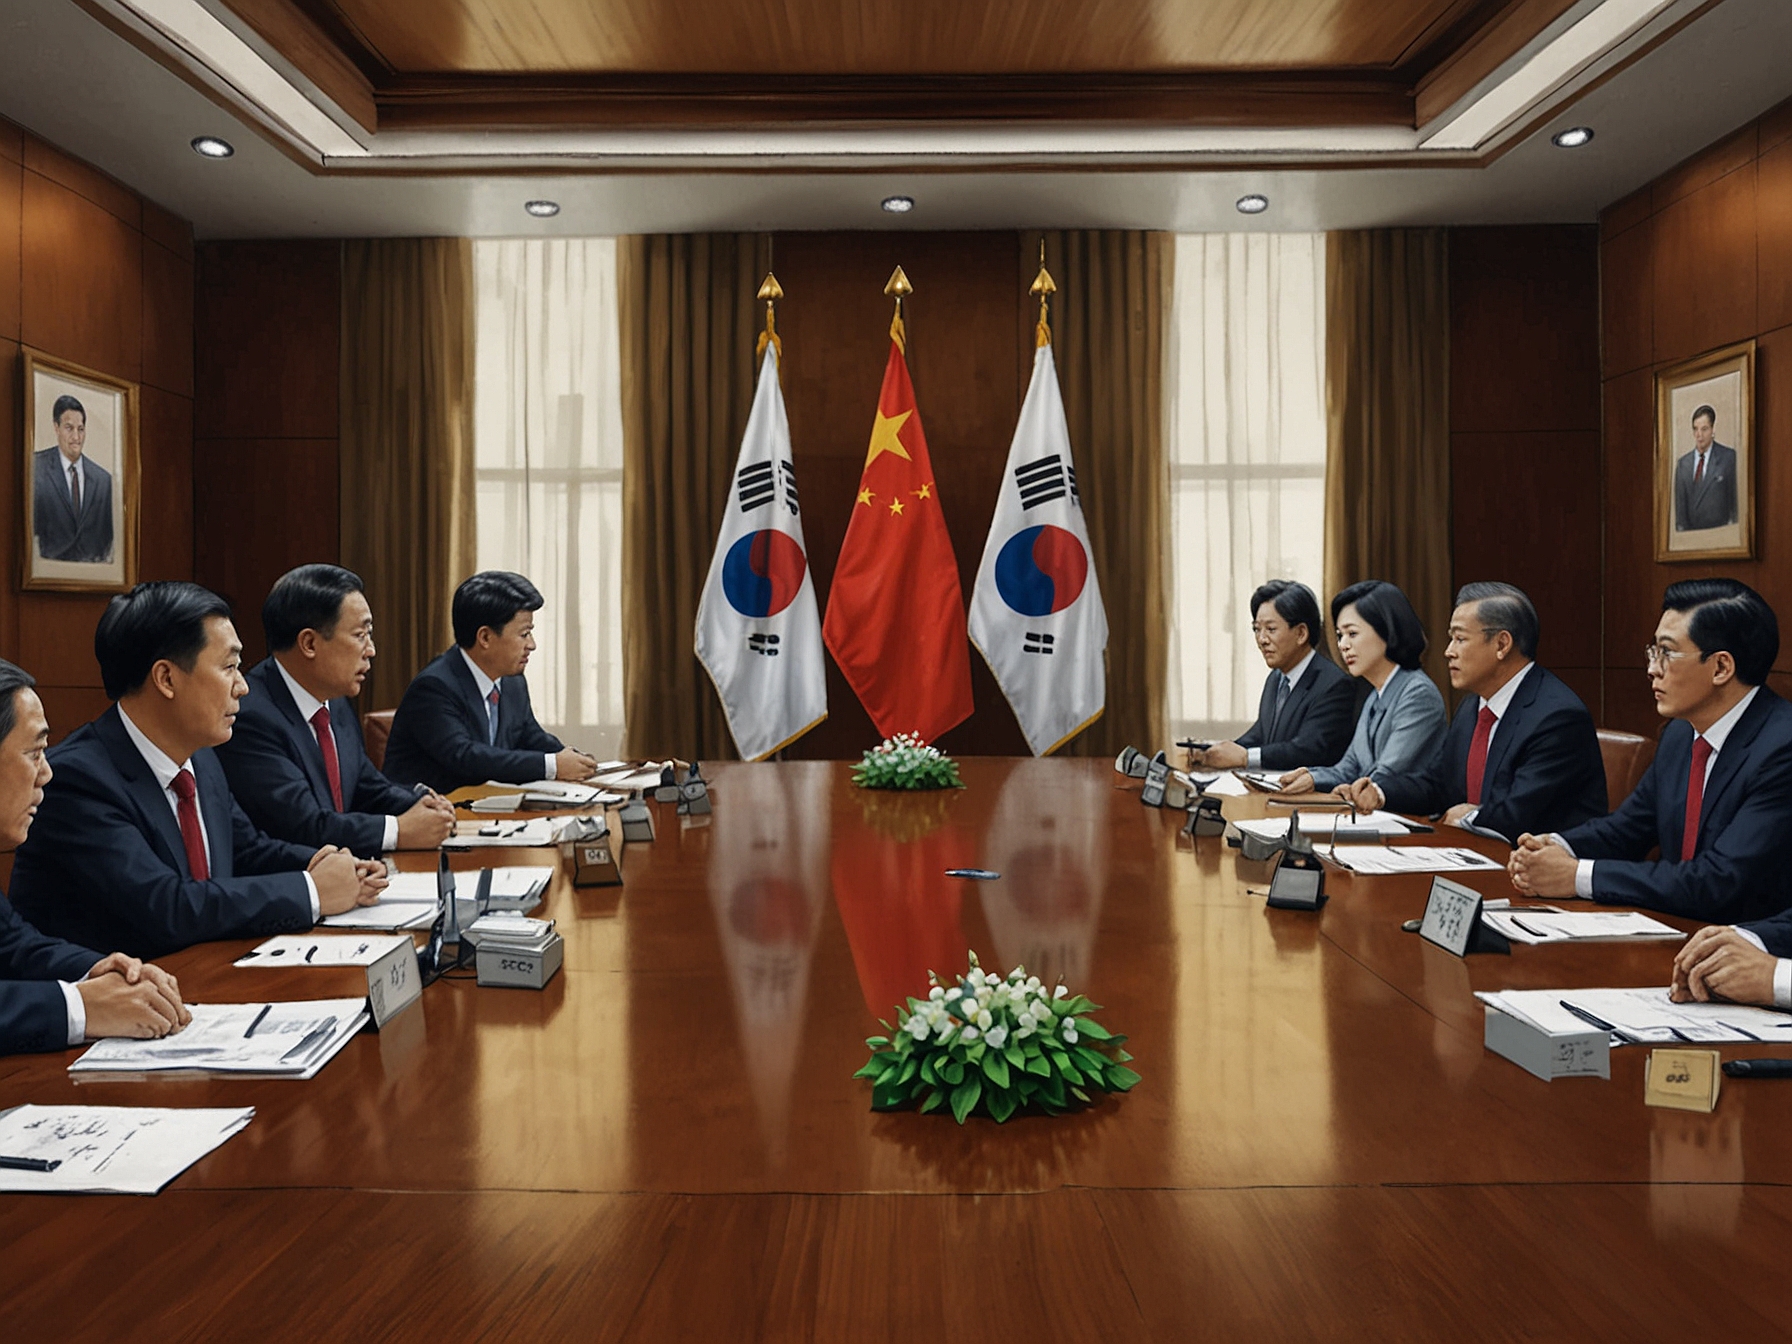 Chinese and South Korean officials seated across from each other in a formal meeting room, engaging in high-level security talks to discuss regional and bilateral concerns.